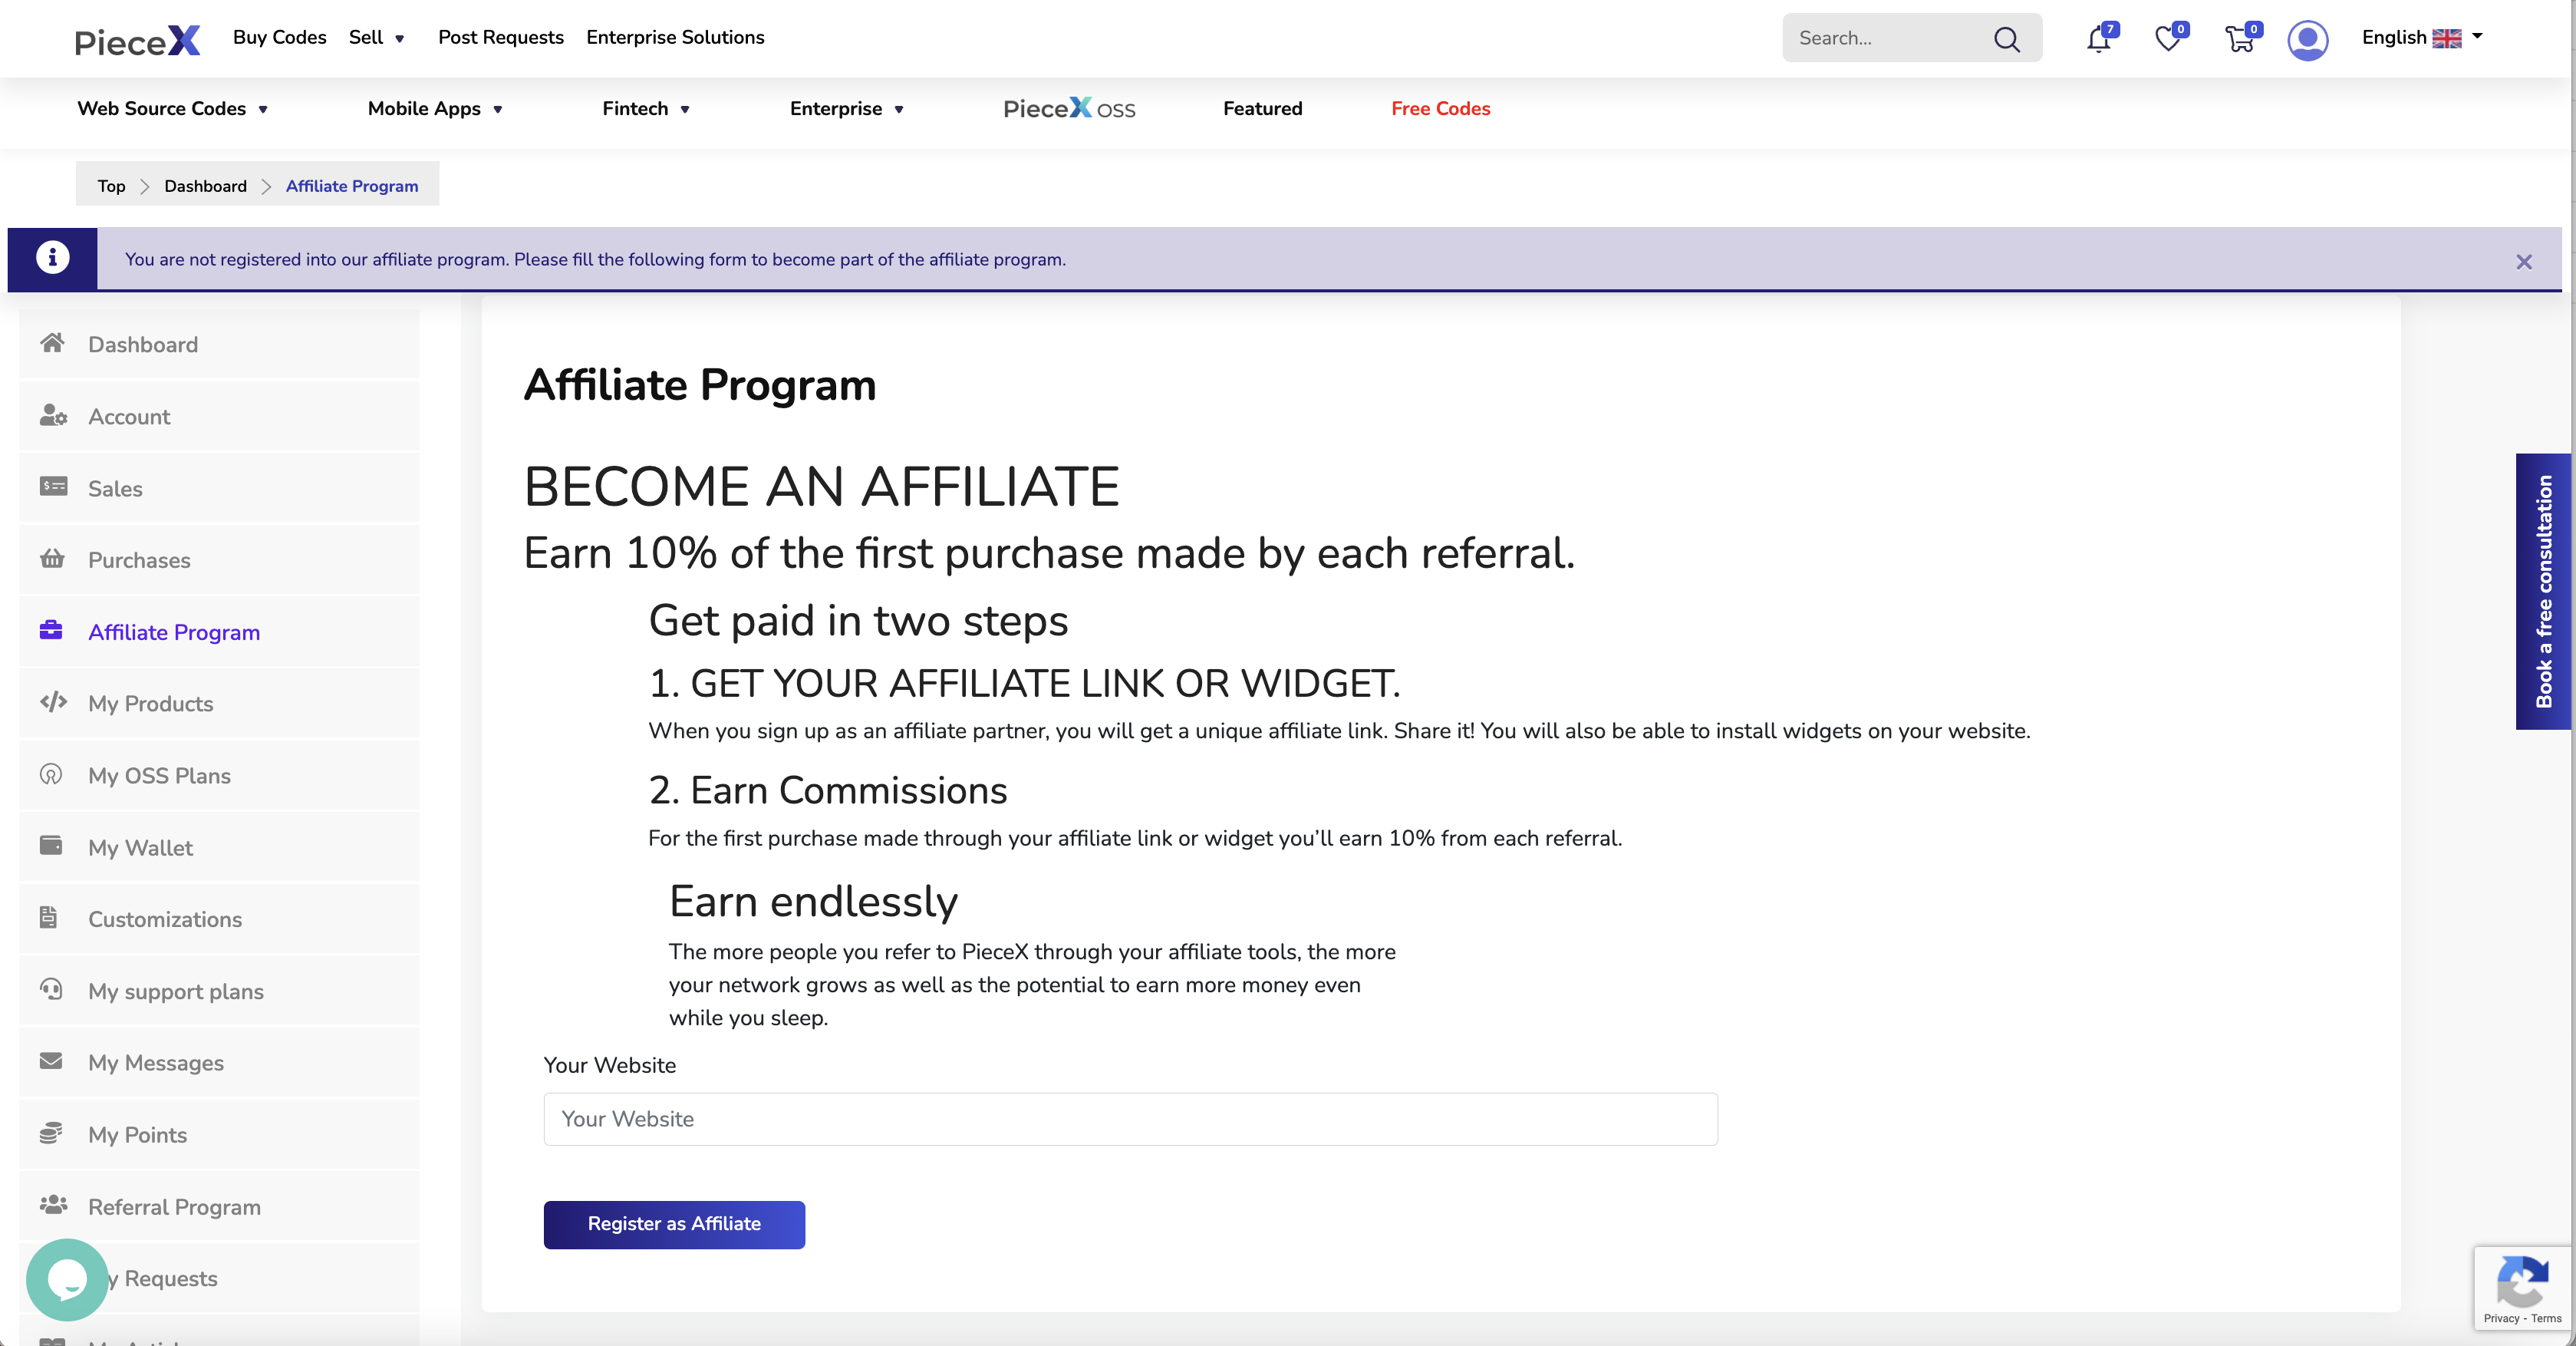 How to become a piecex affiliate - register as an affiliate